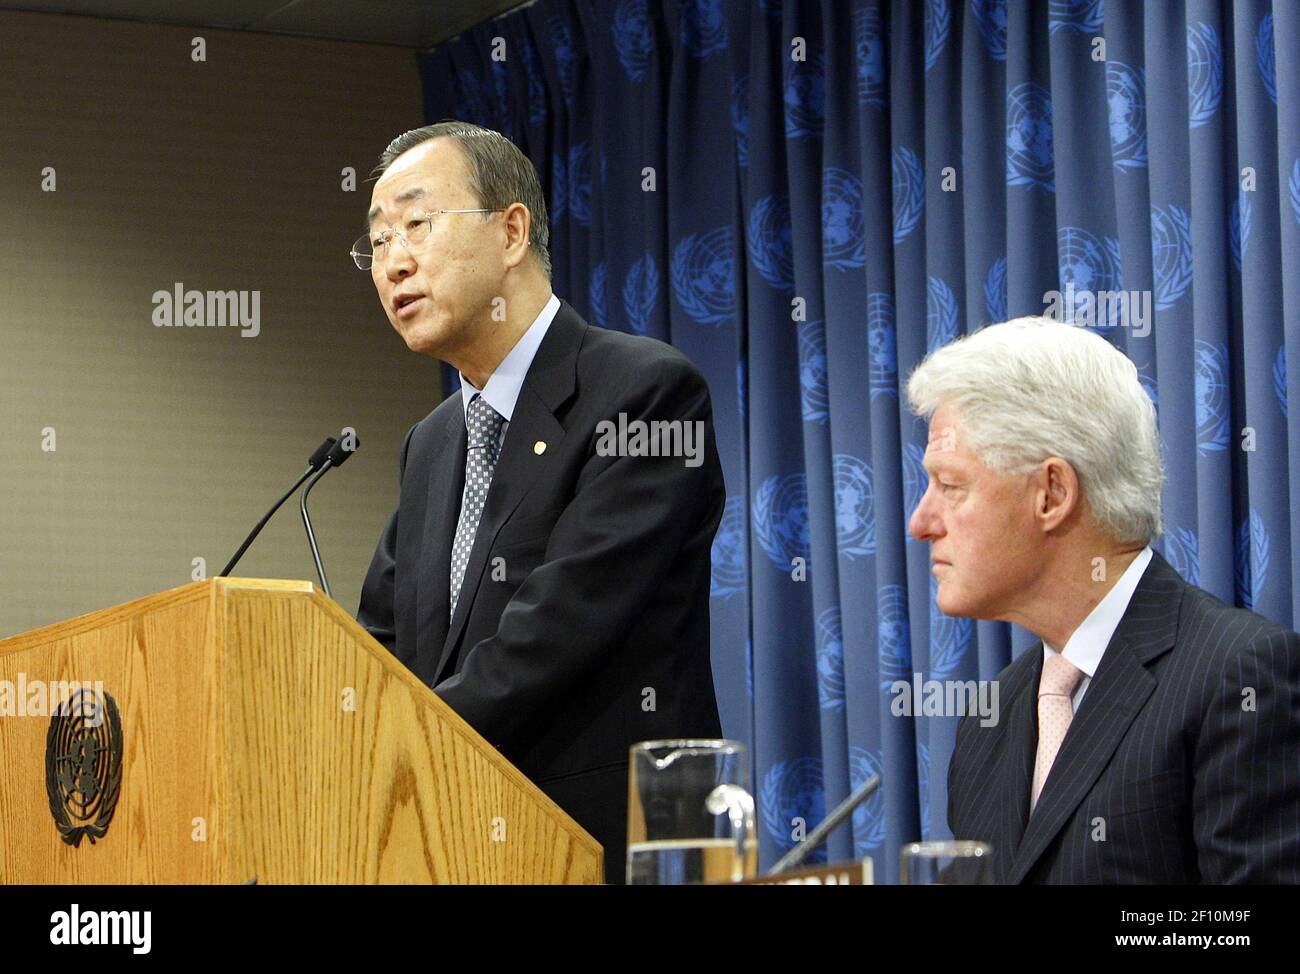 15 June 2009 - New York, NY - Secretary-General Ban Ki-moon addresses a press conference on Haiti, as William Jefferson Clinton (right), United Nations Special Envoy for Haiti and former President of the United States of America, listens. Photo Credit: Mark Garten / UN Photo/Sipa Press/0906171554 Stock Photo